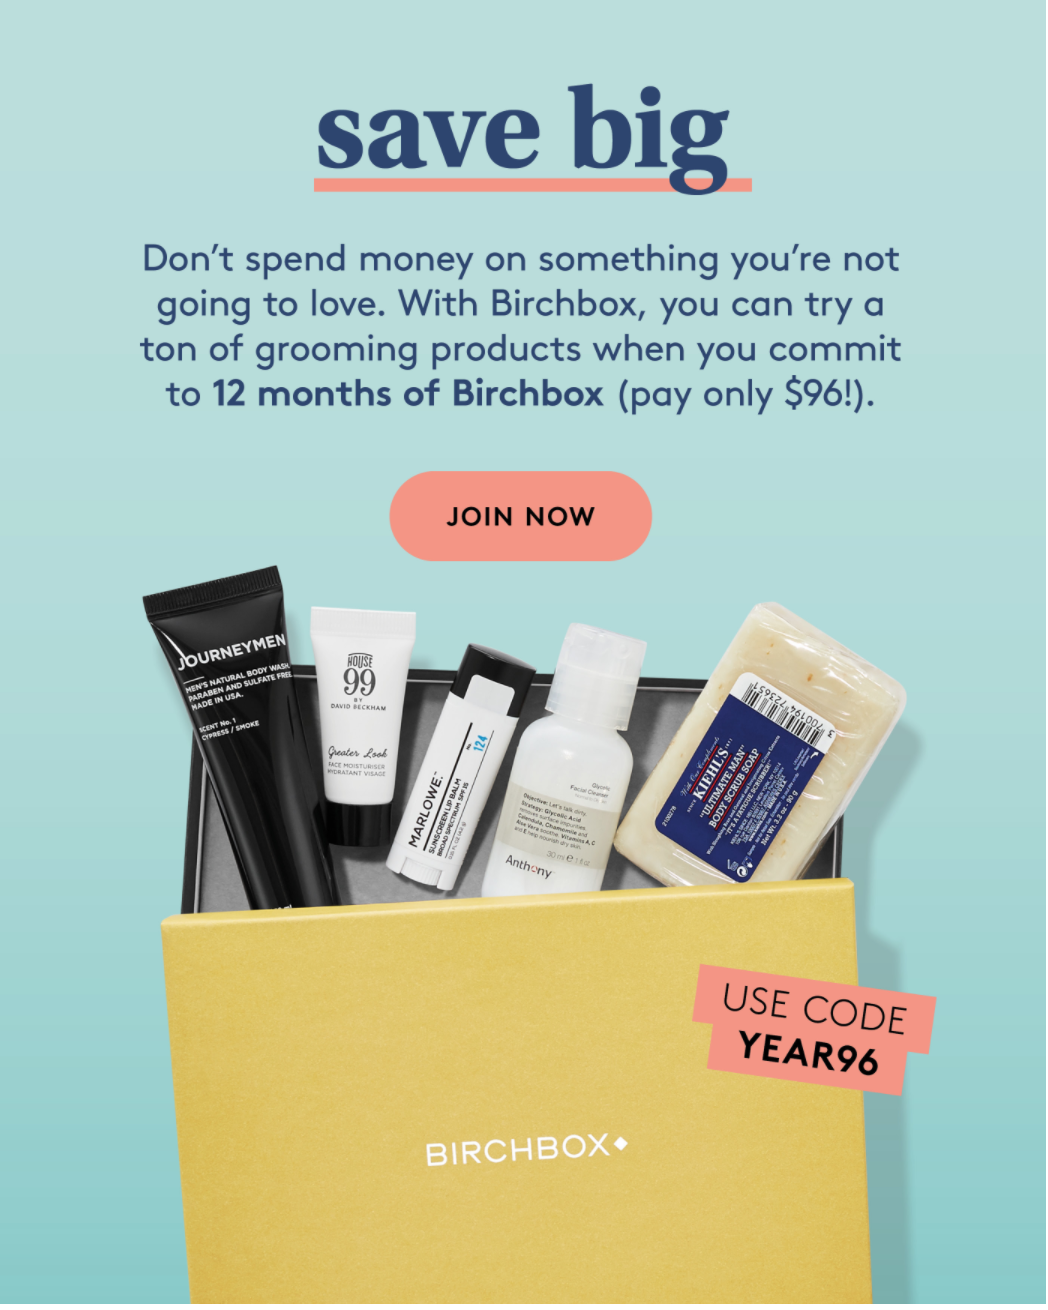 Birchbox Grooming Coupon – Get An Annual Subscription for $8 a Box!